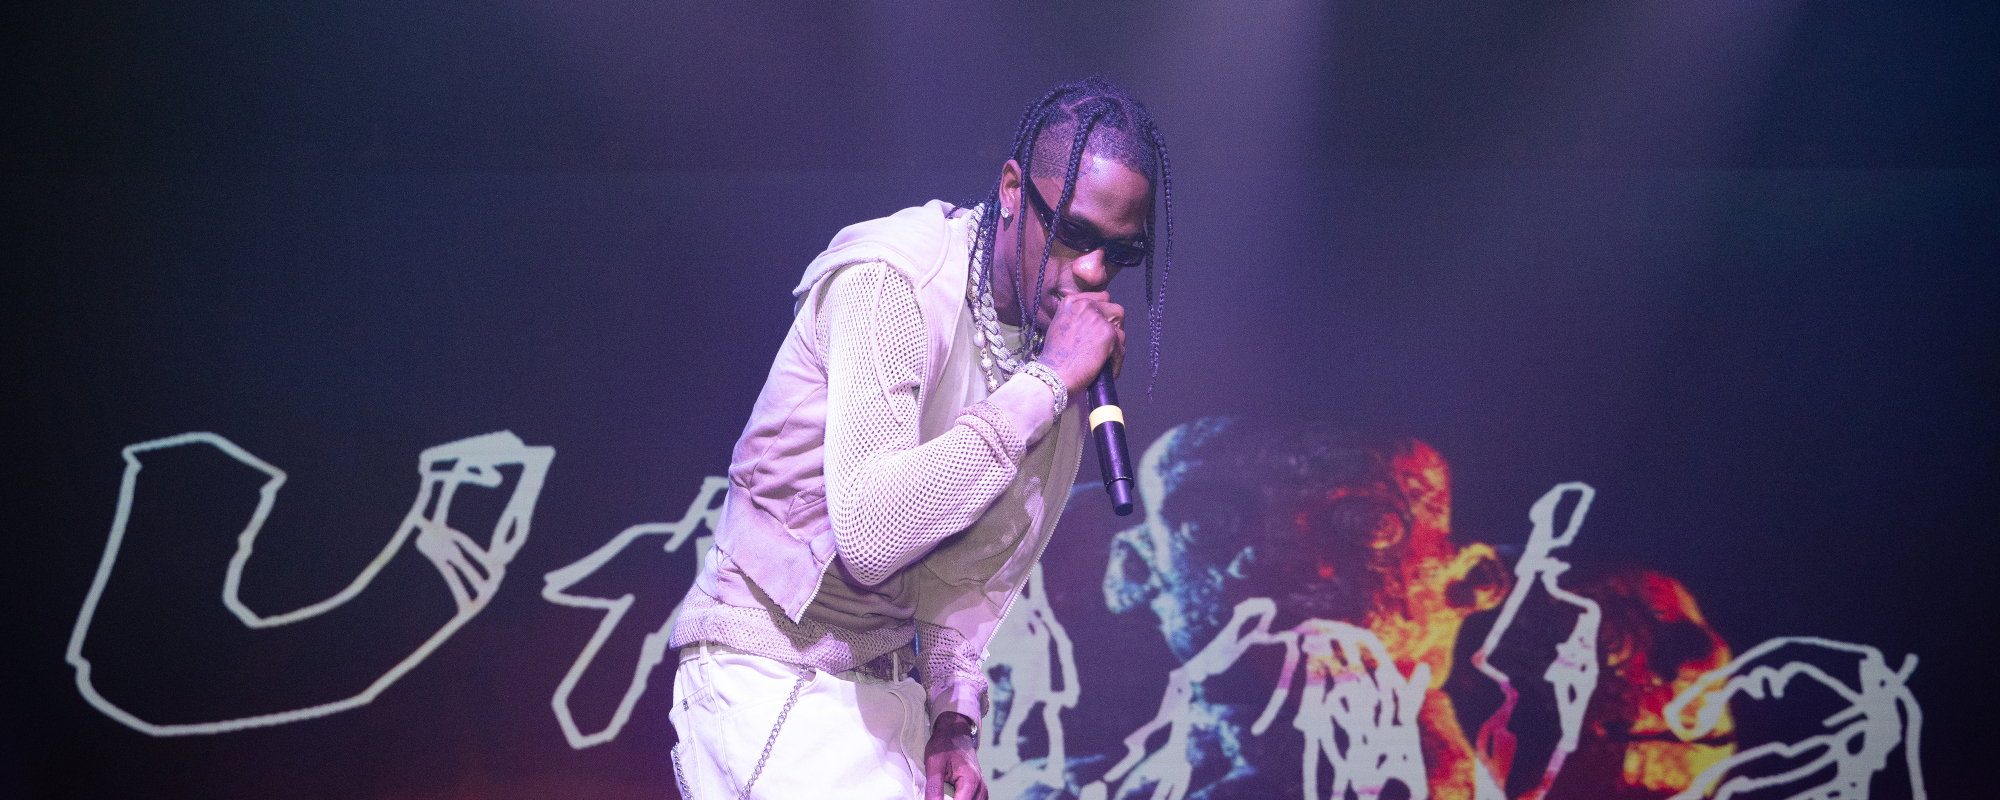 Travis Scott’s Monday: ‘UTOPIA’ Goes No. 1, Unites with Kanye West at Concert in Rome